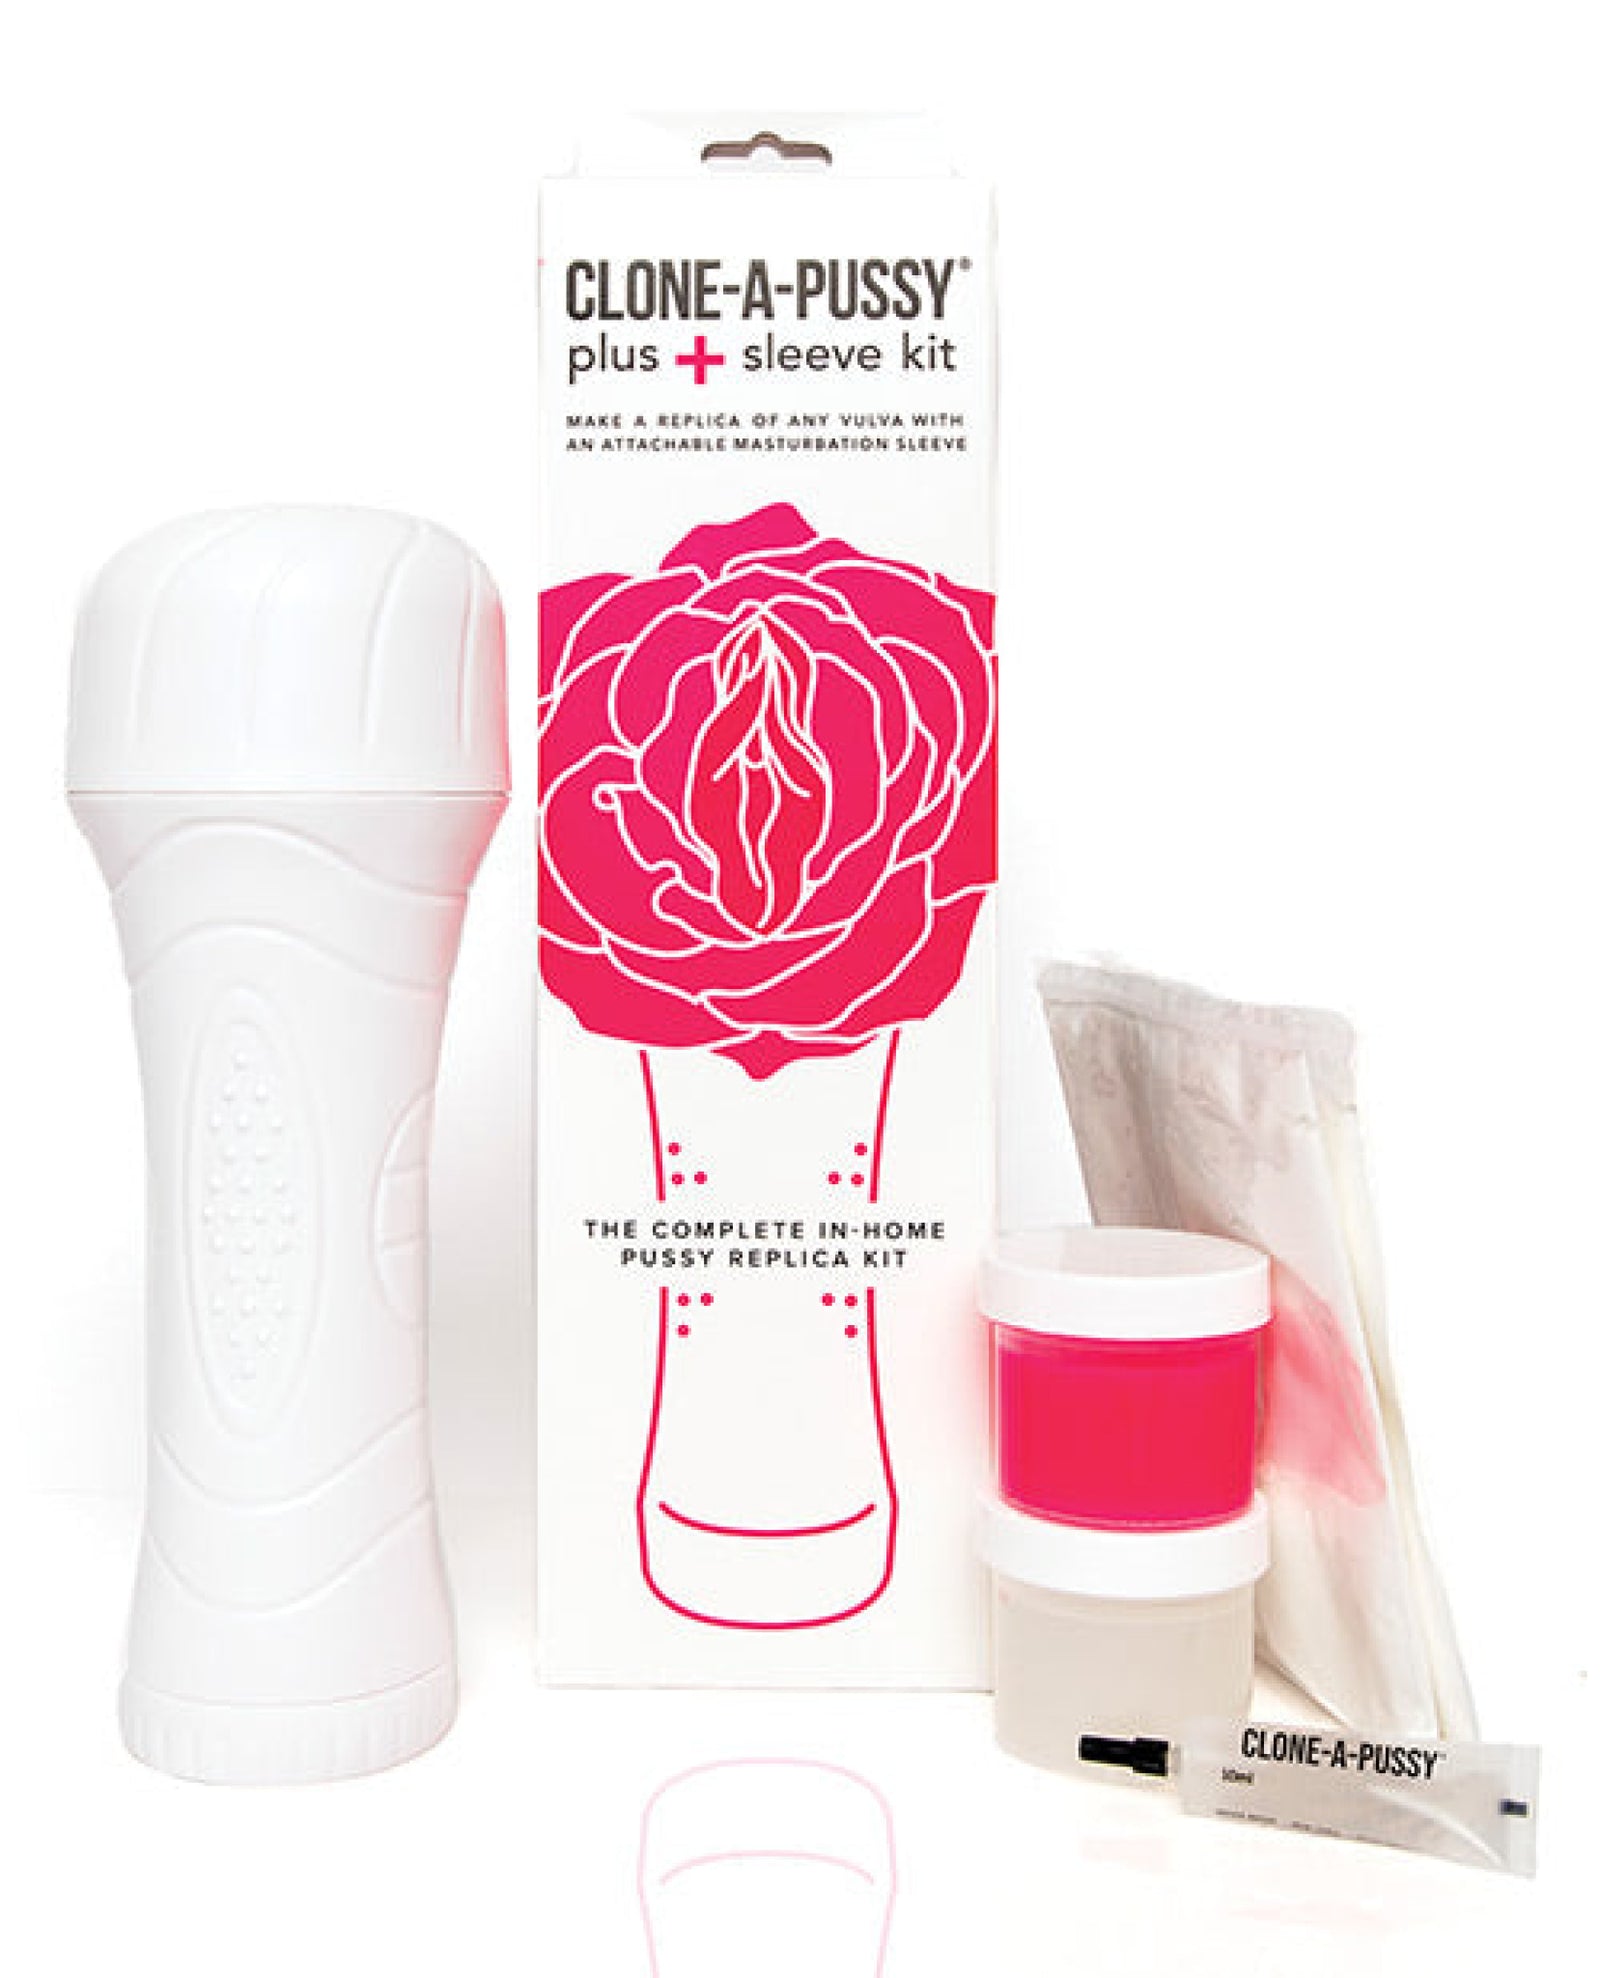 Clone-a-pussy Plus+ Sleeve Clone A Willy